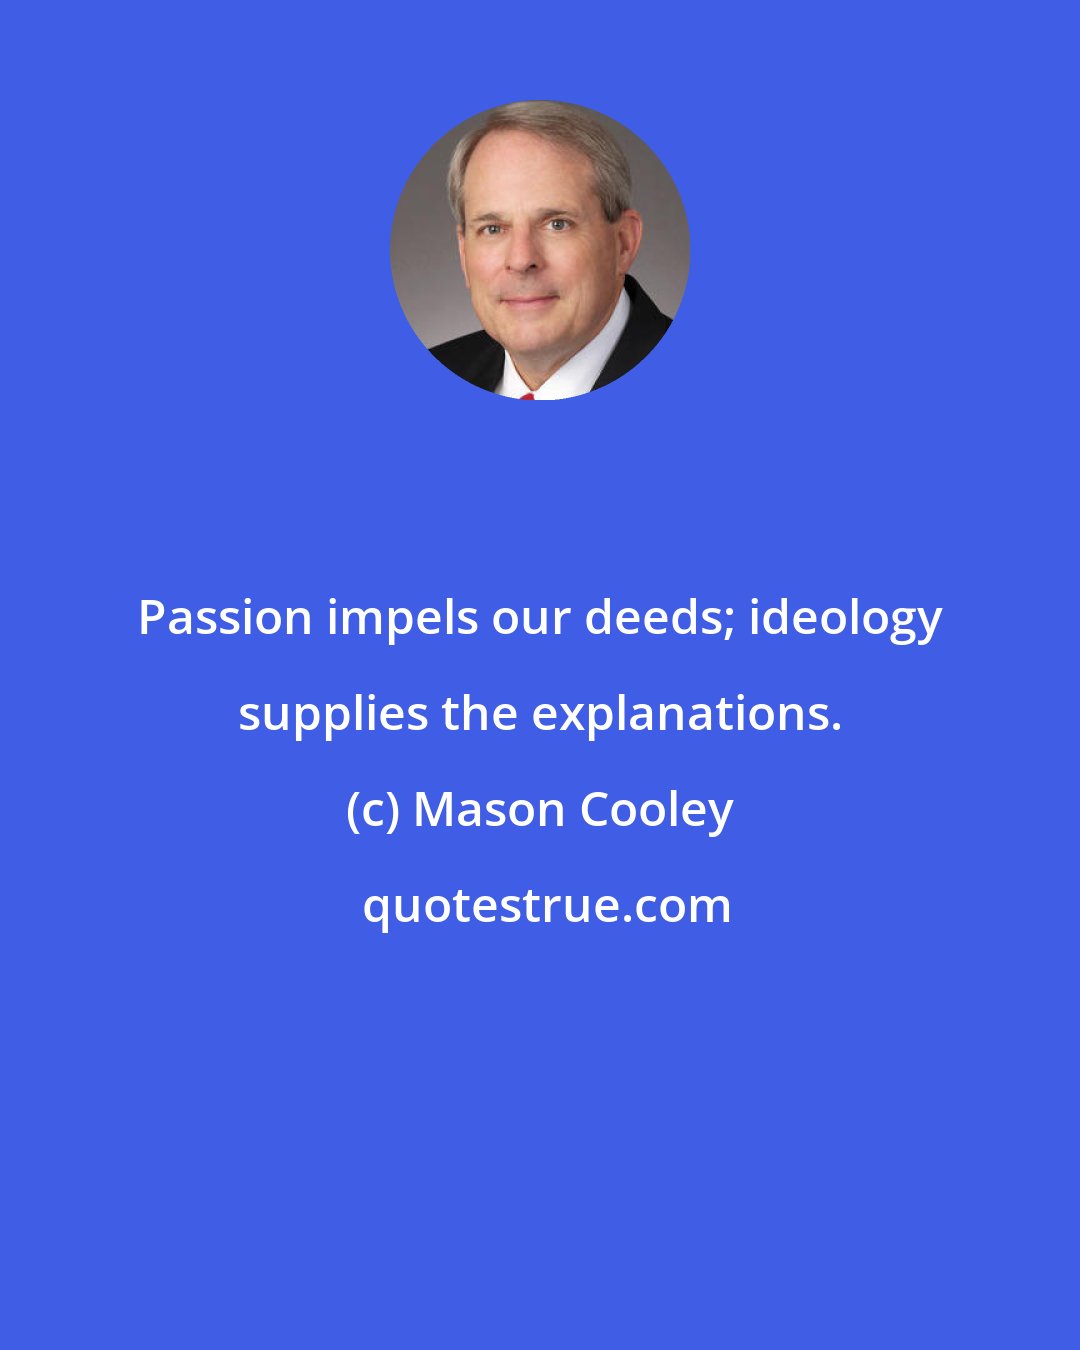 Mason Cooley: Passion impels our deeds; ideology supplies the explanations.